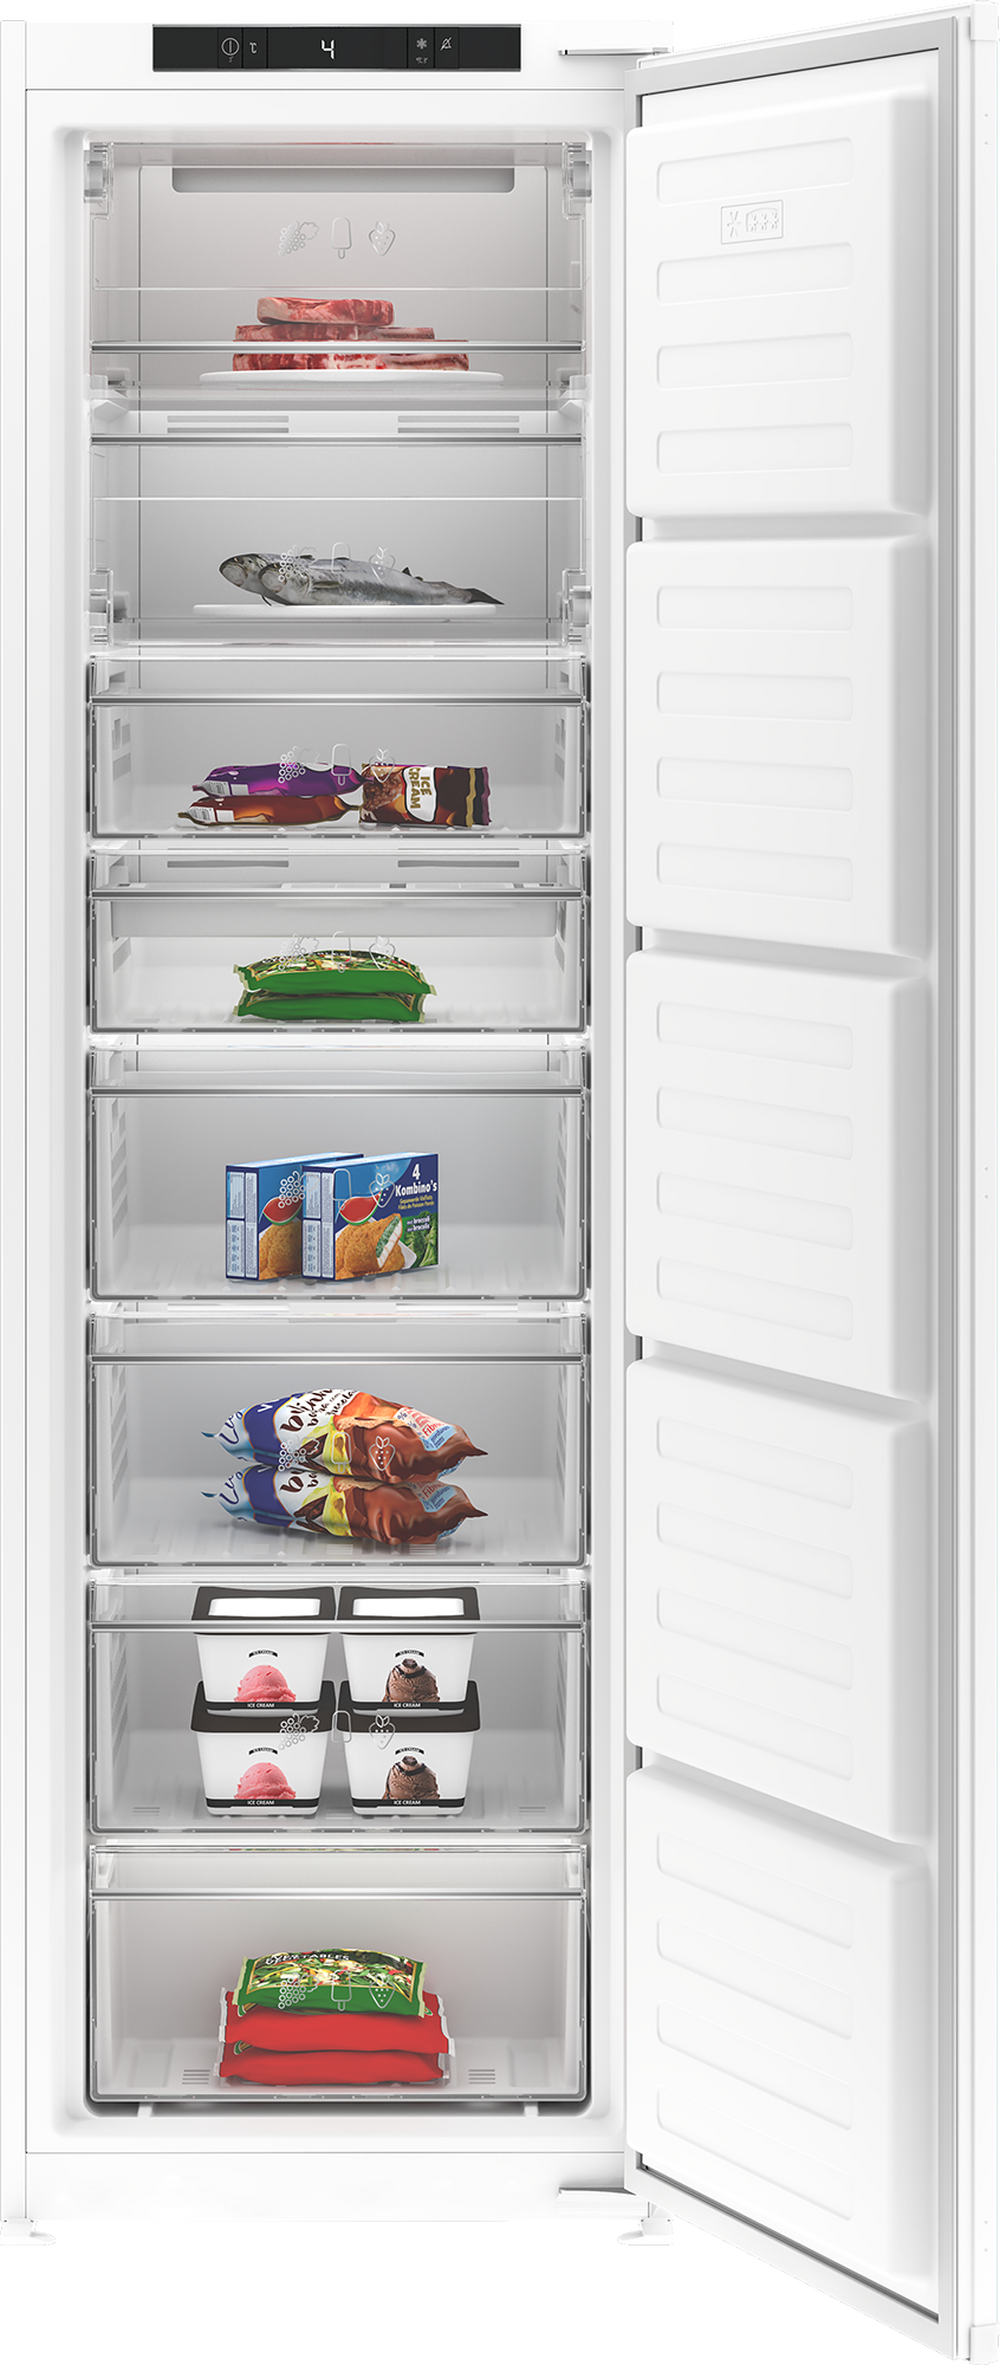 Blomberg FNT4454I 54cm Integrated Frost Free Tall Freezer - 5 Year Guarantee